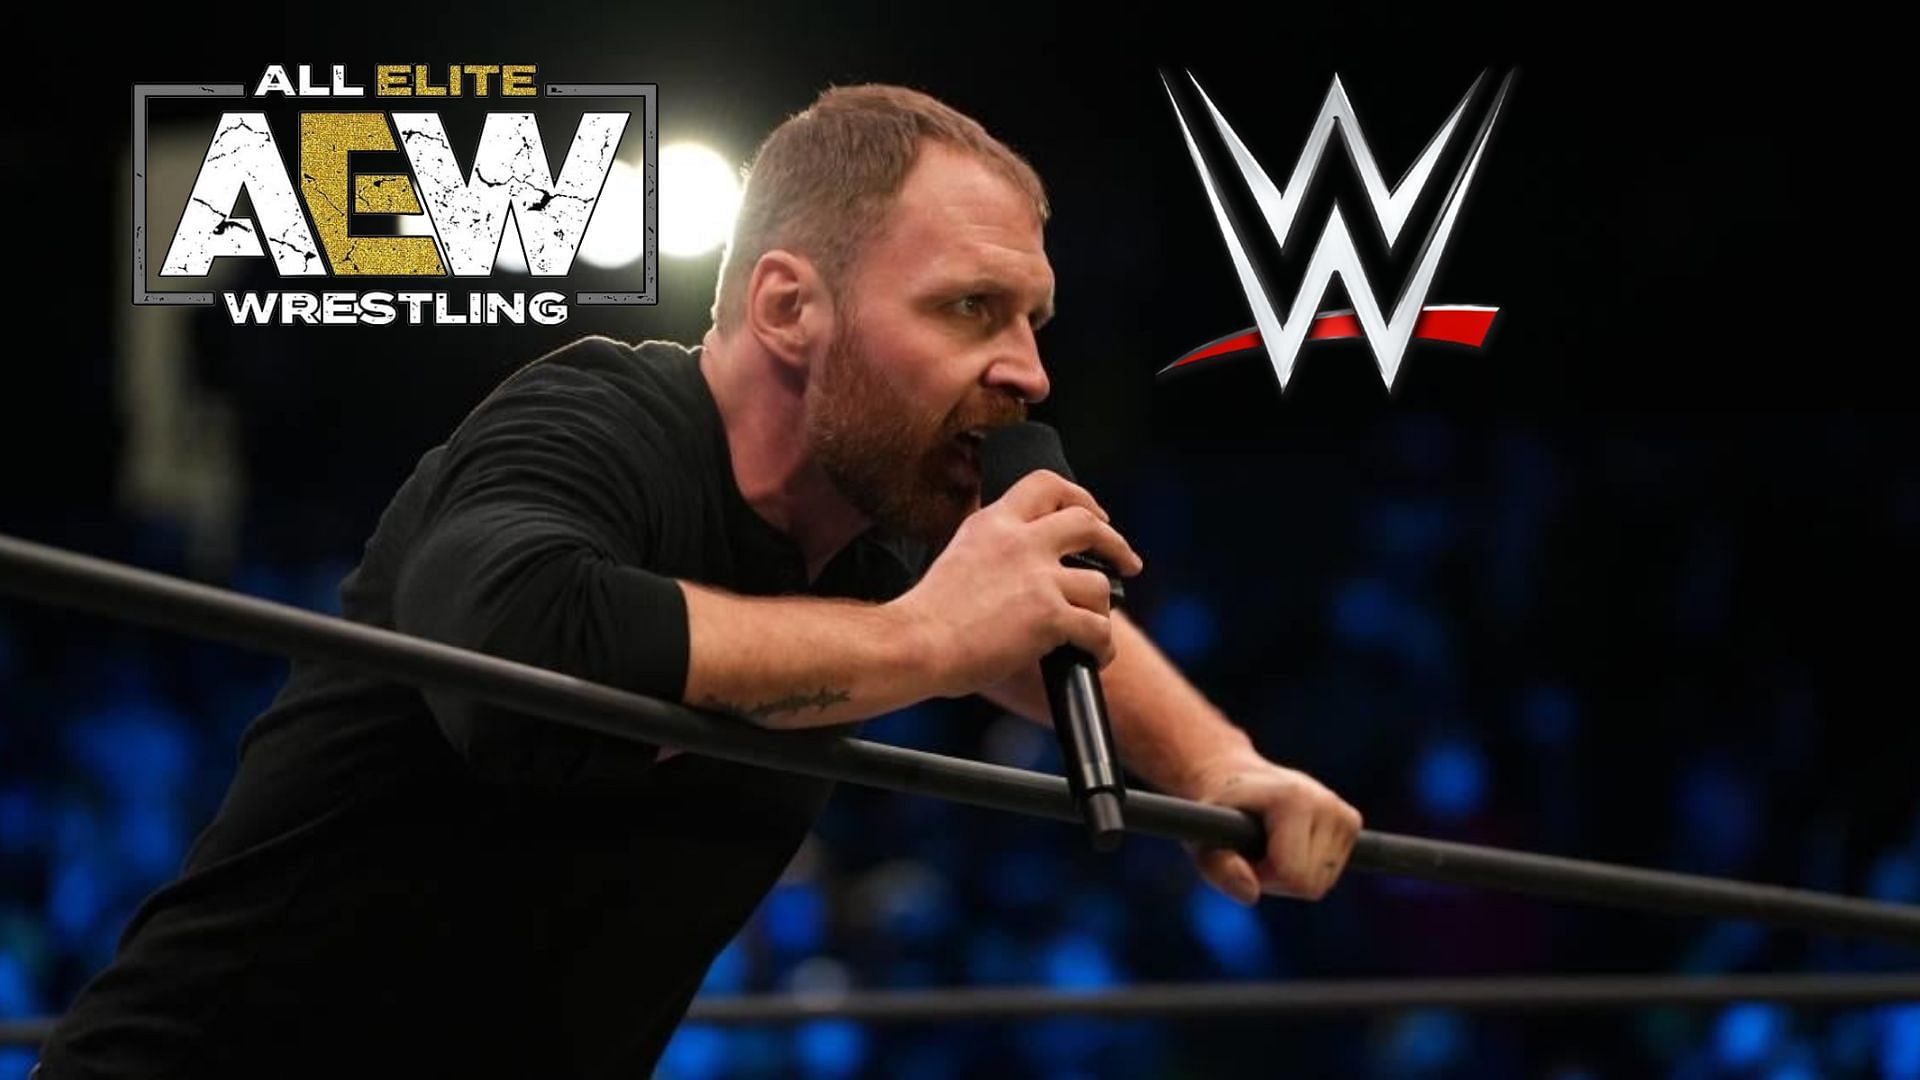 Former WWE star Jon Moxley will defend his AEW World Championship in the upcoming pay-per-view